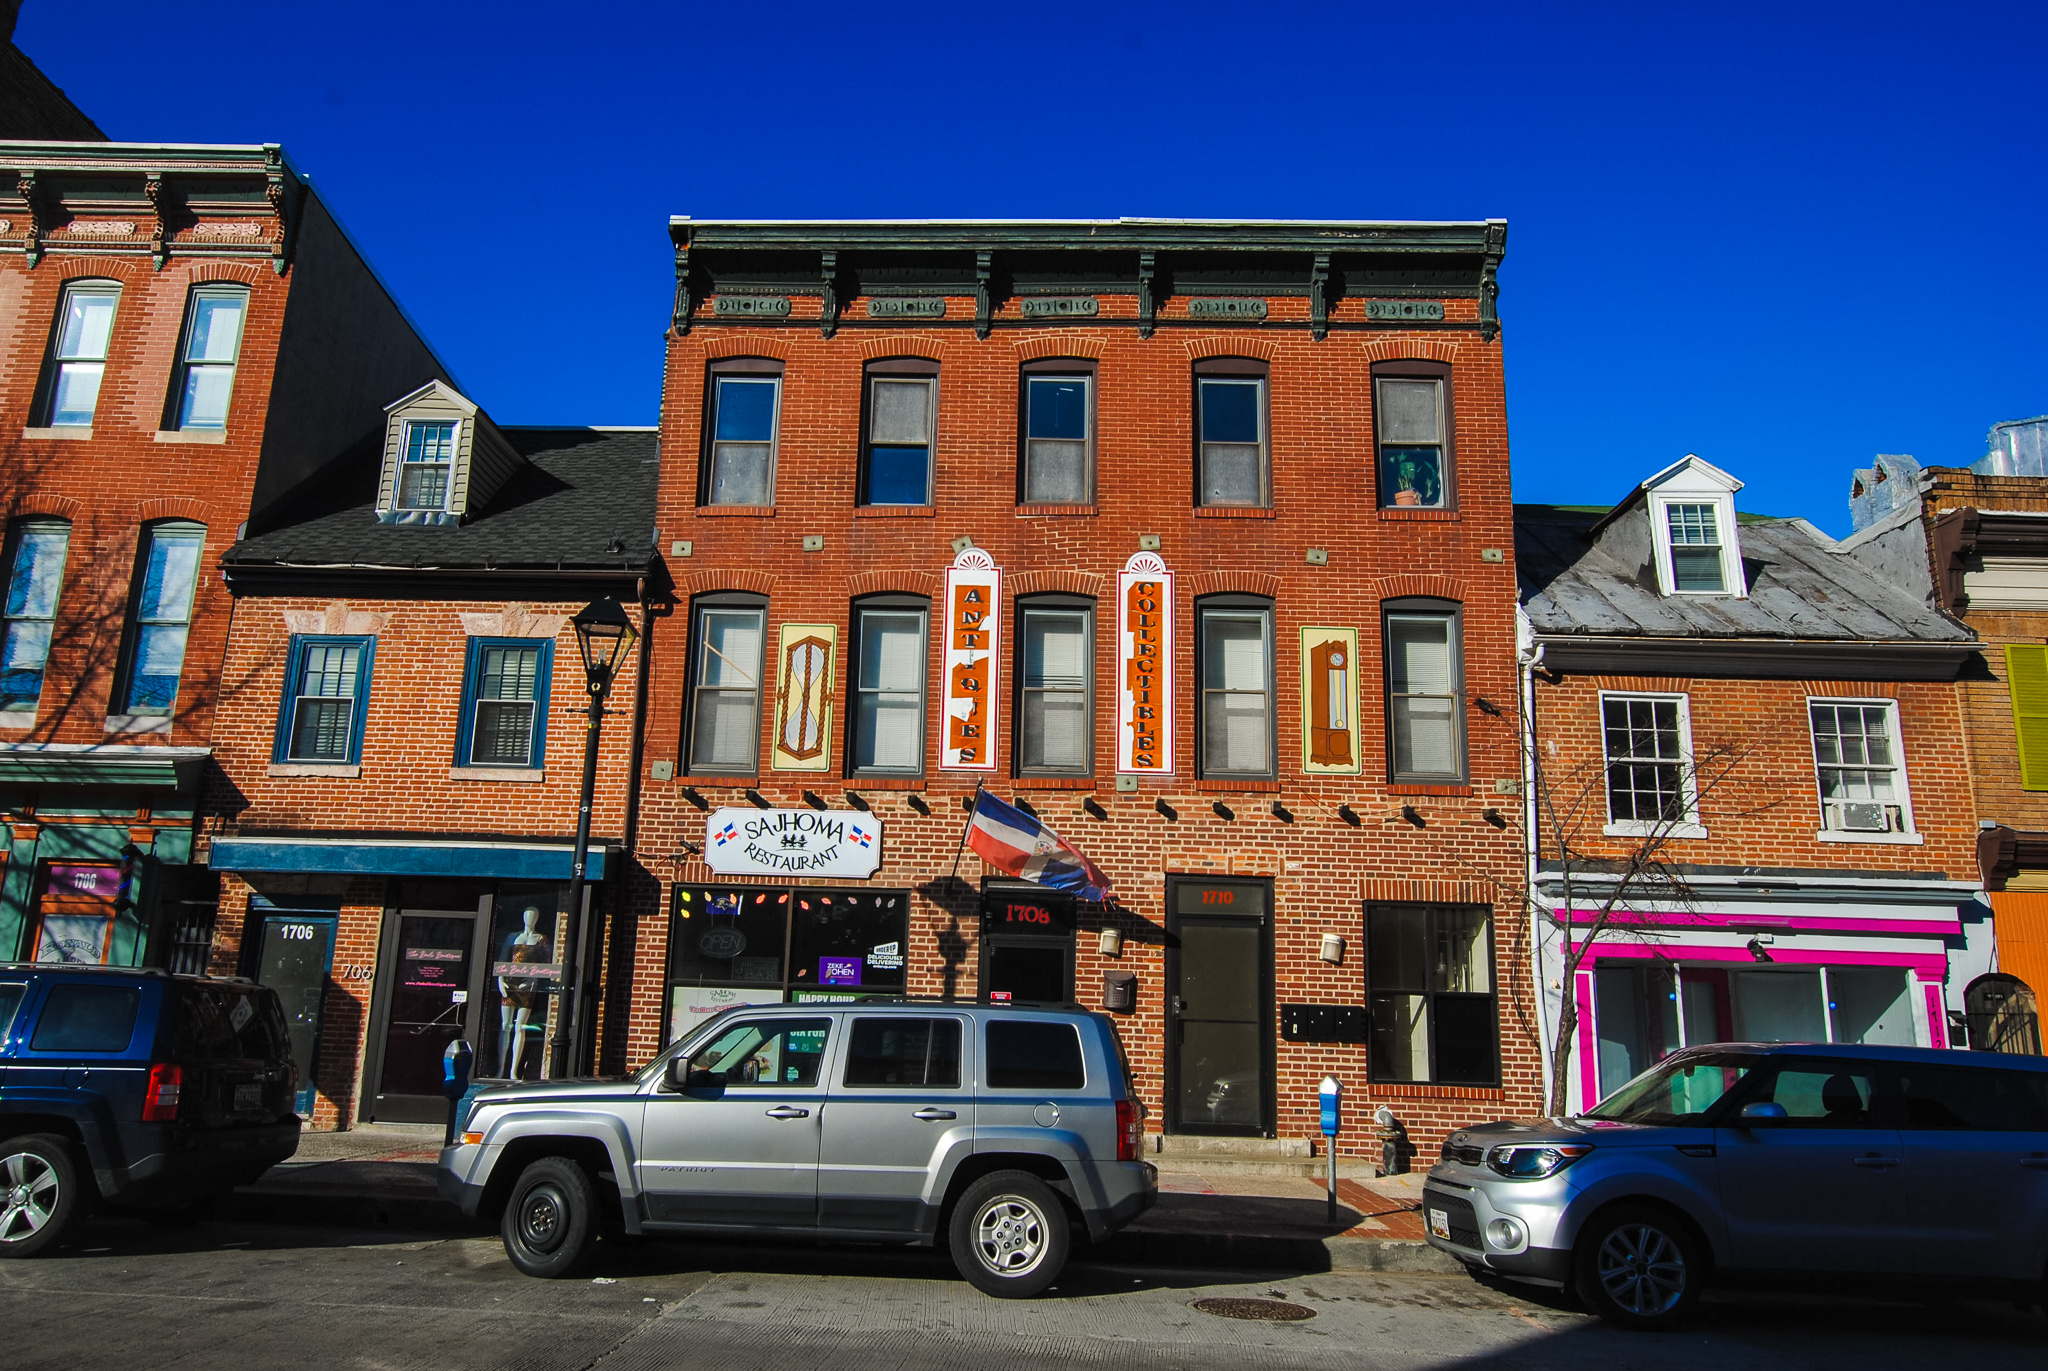 1708 – 1710 Fleet St: 3 Apartments, 1 Retail Space Fully Leased in Historic Fells Point